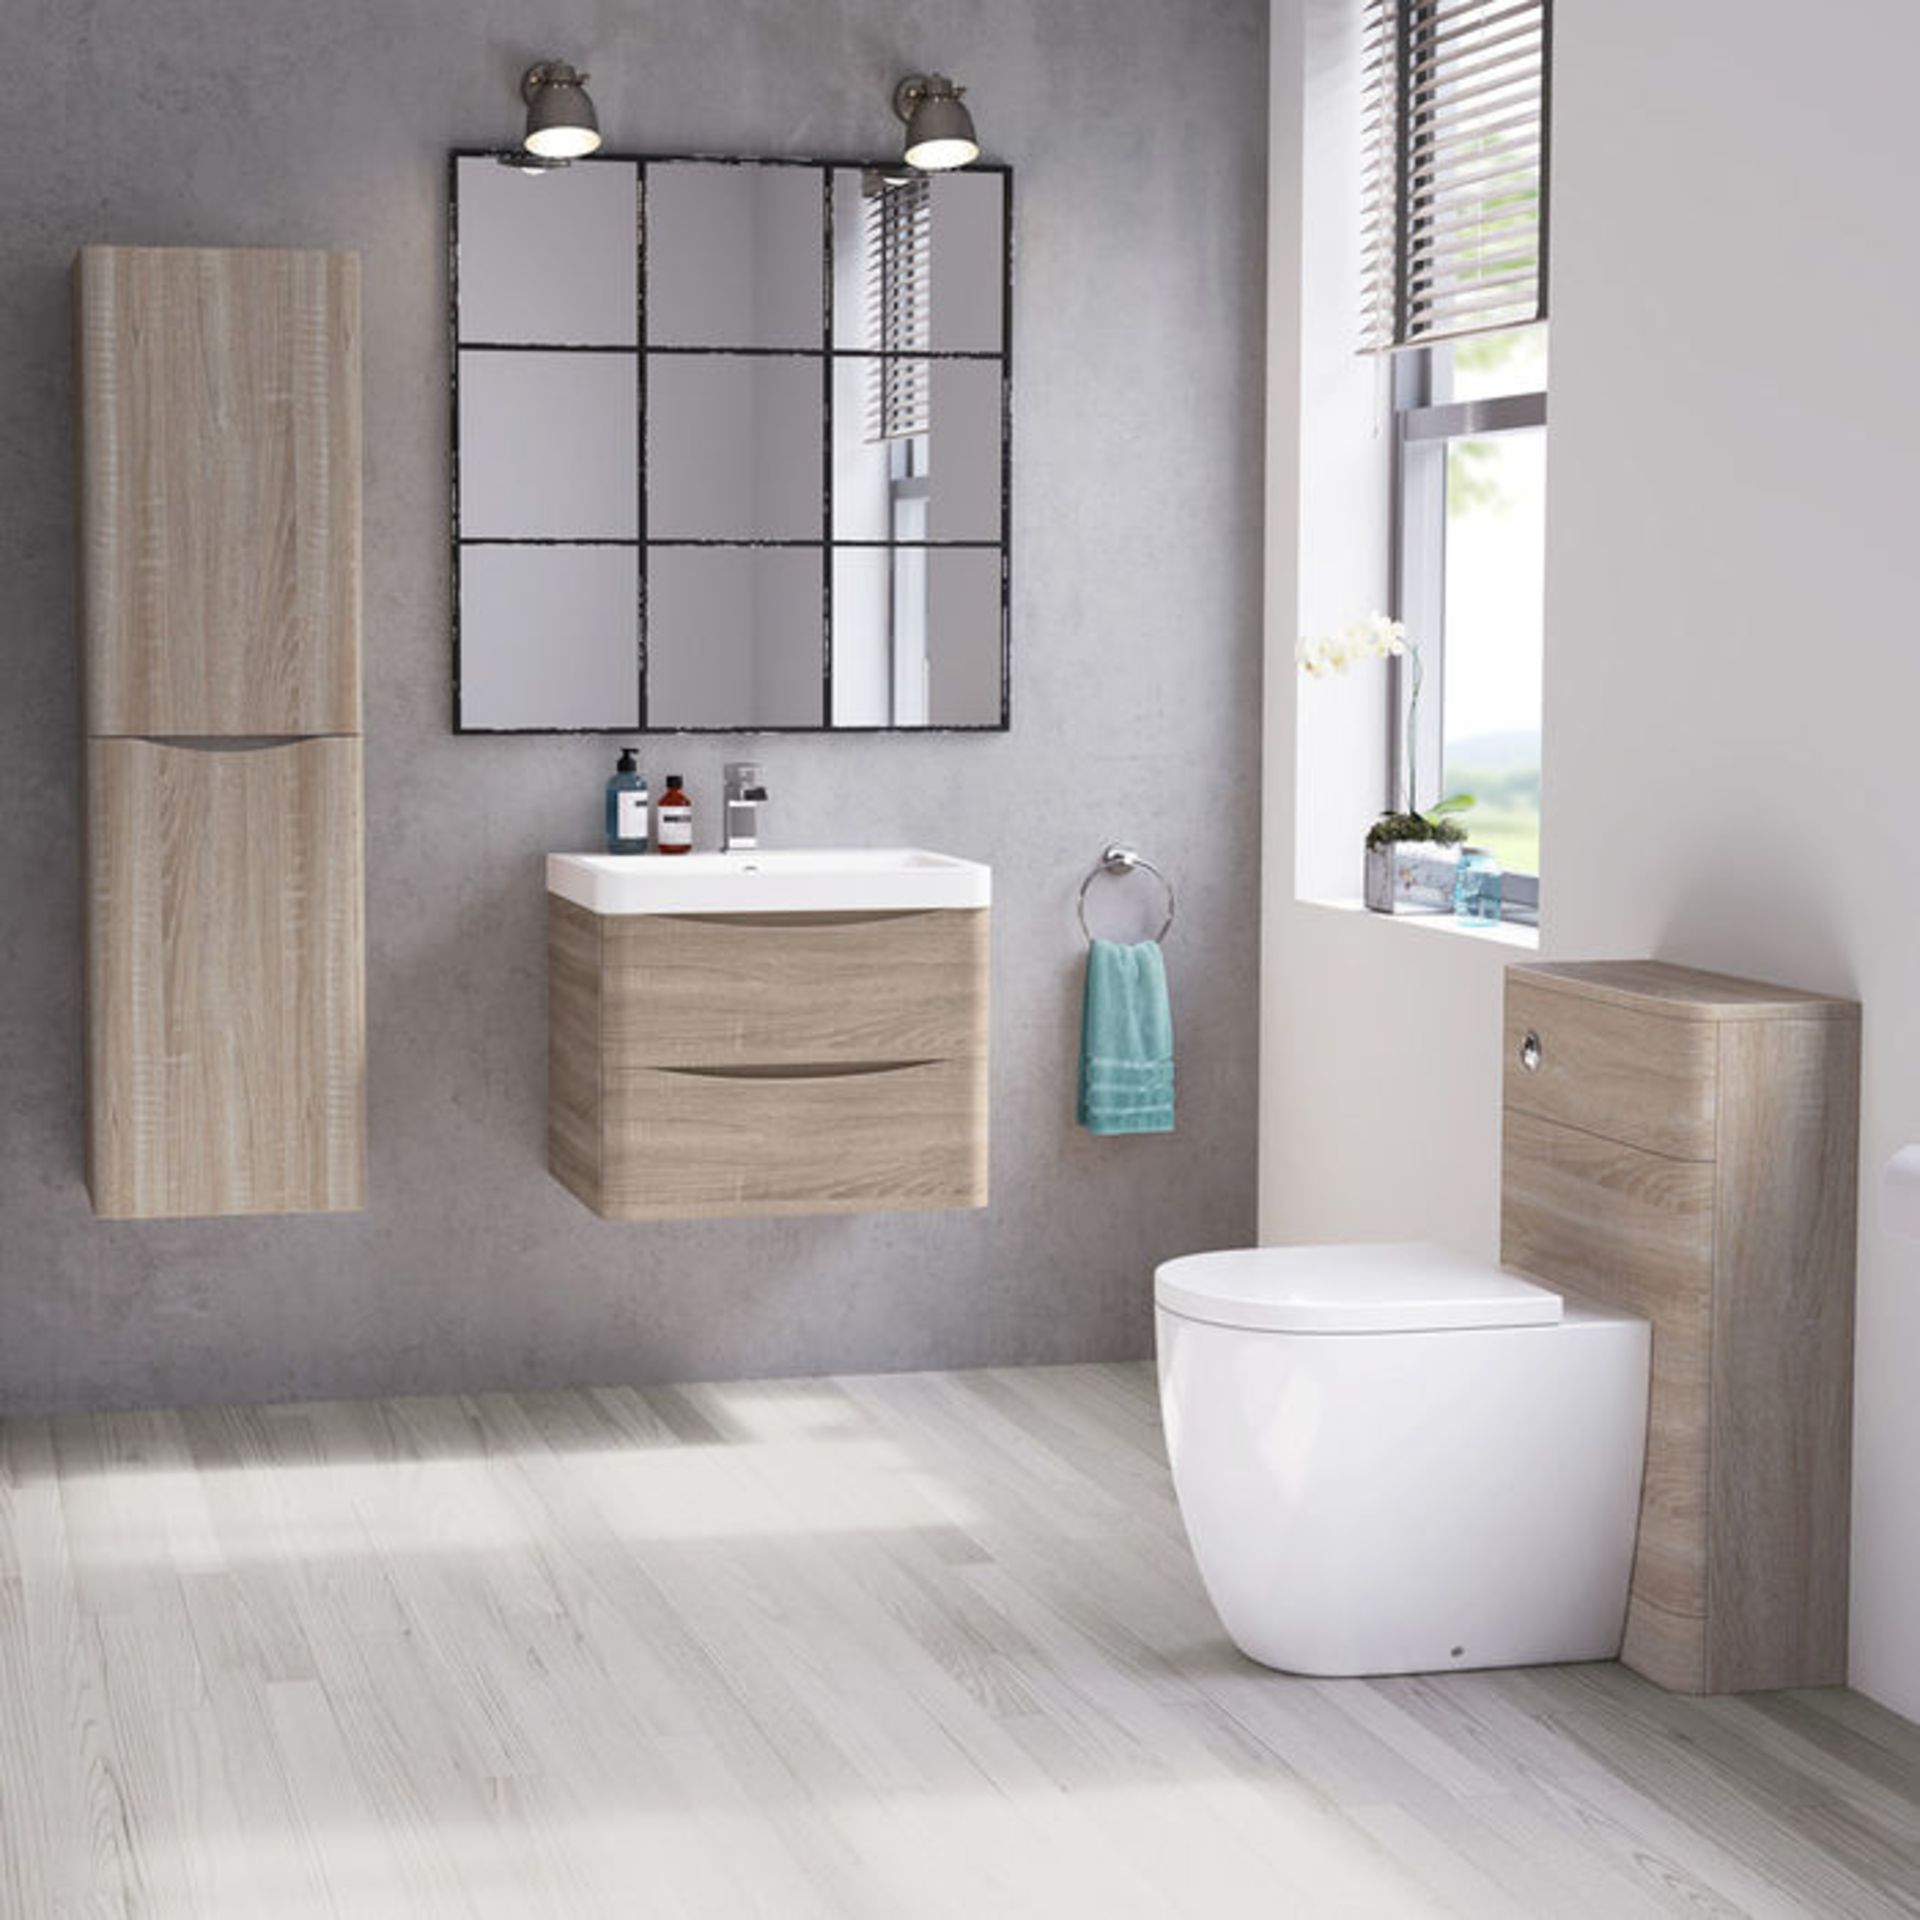 (OS68) 600mm Austin II Light Oak Effect Built In Basin Drawer Unit - Wall Hung. RRP £499.99. Comes - Image 3 of 3